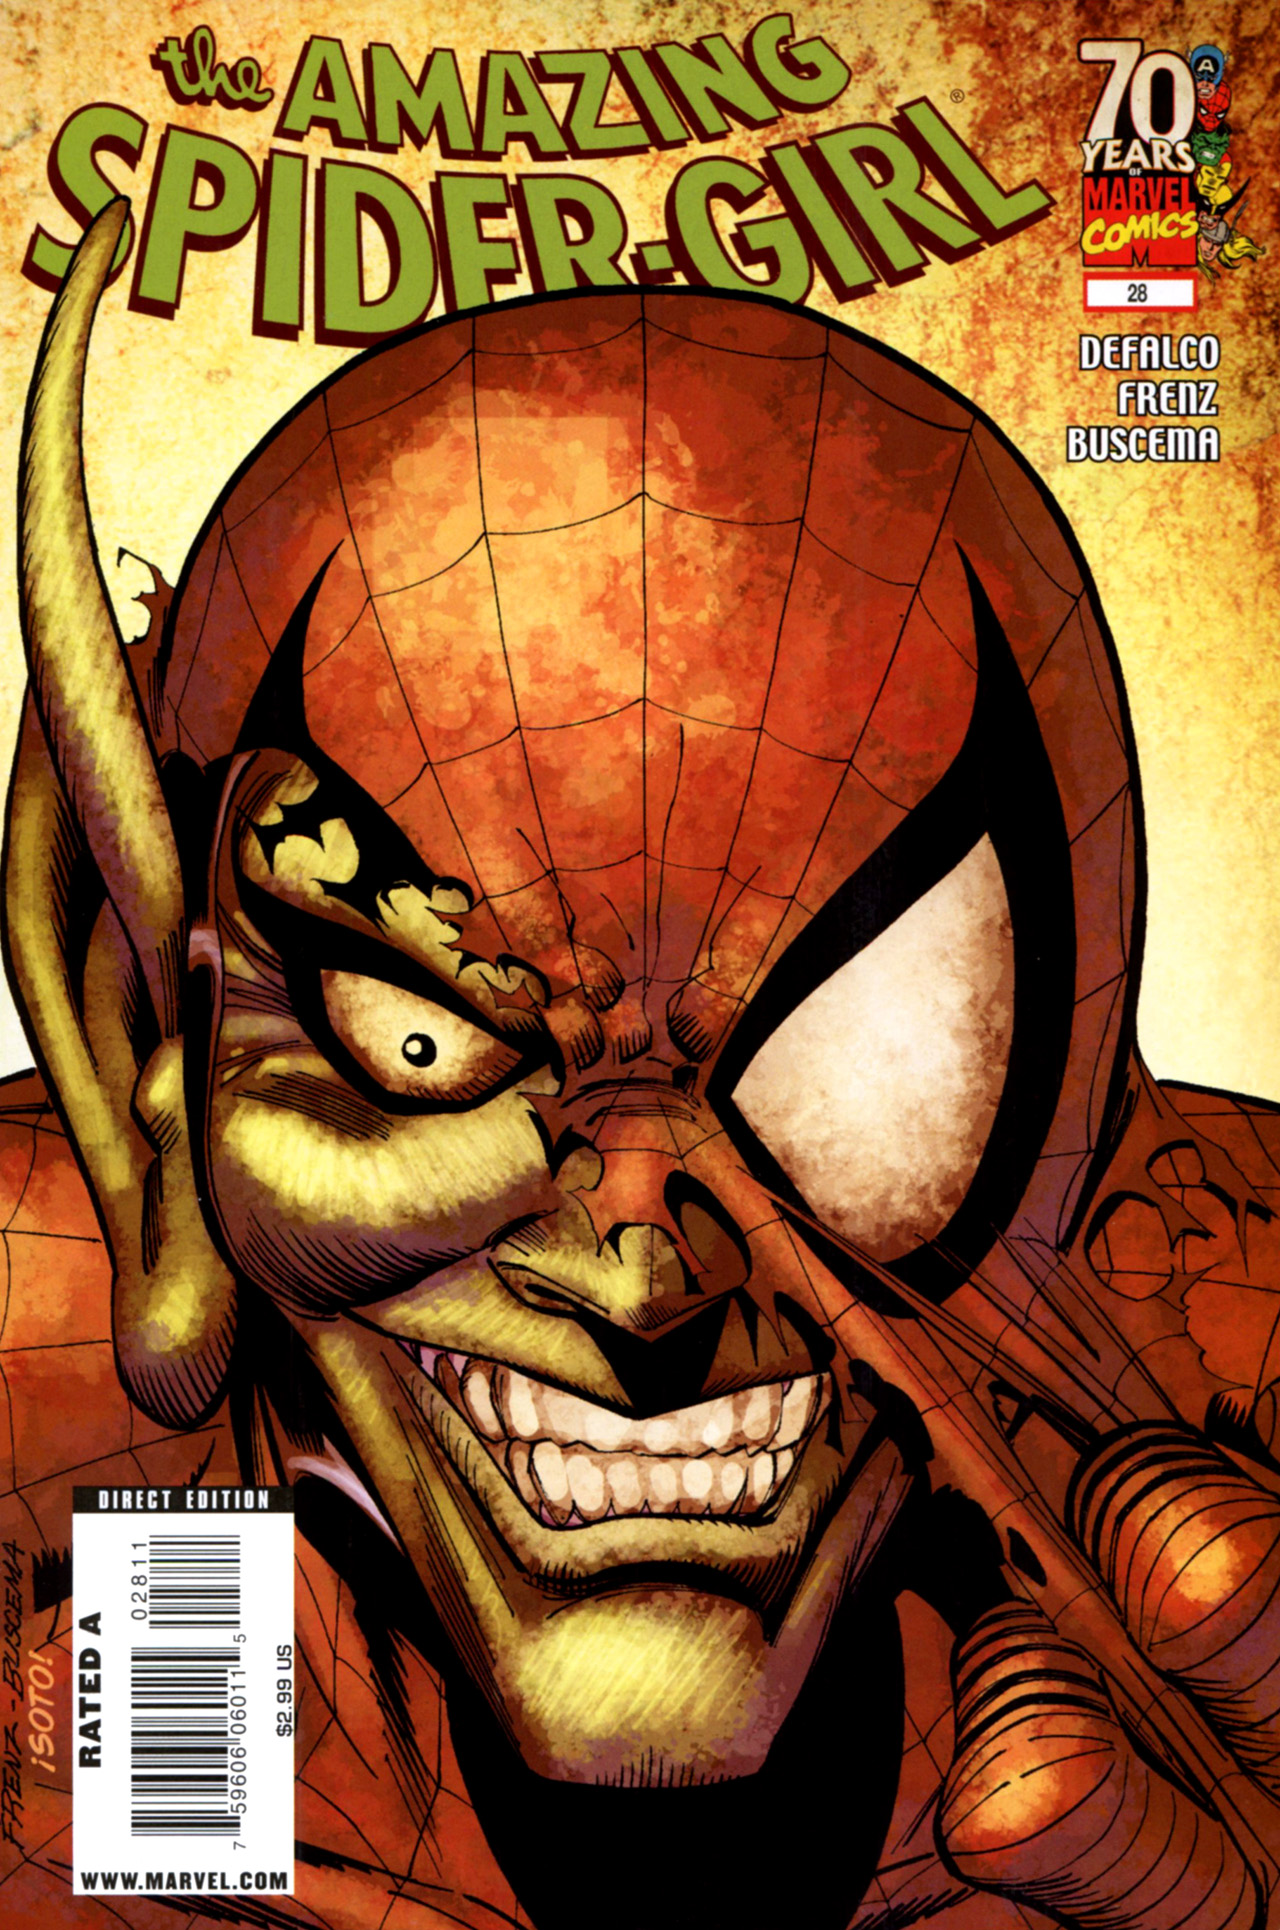 Read online Amazing Spider-Girl comic -  Issue #28 - 1